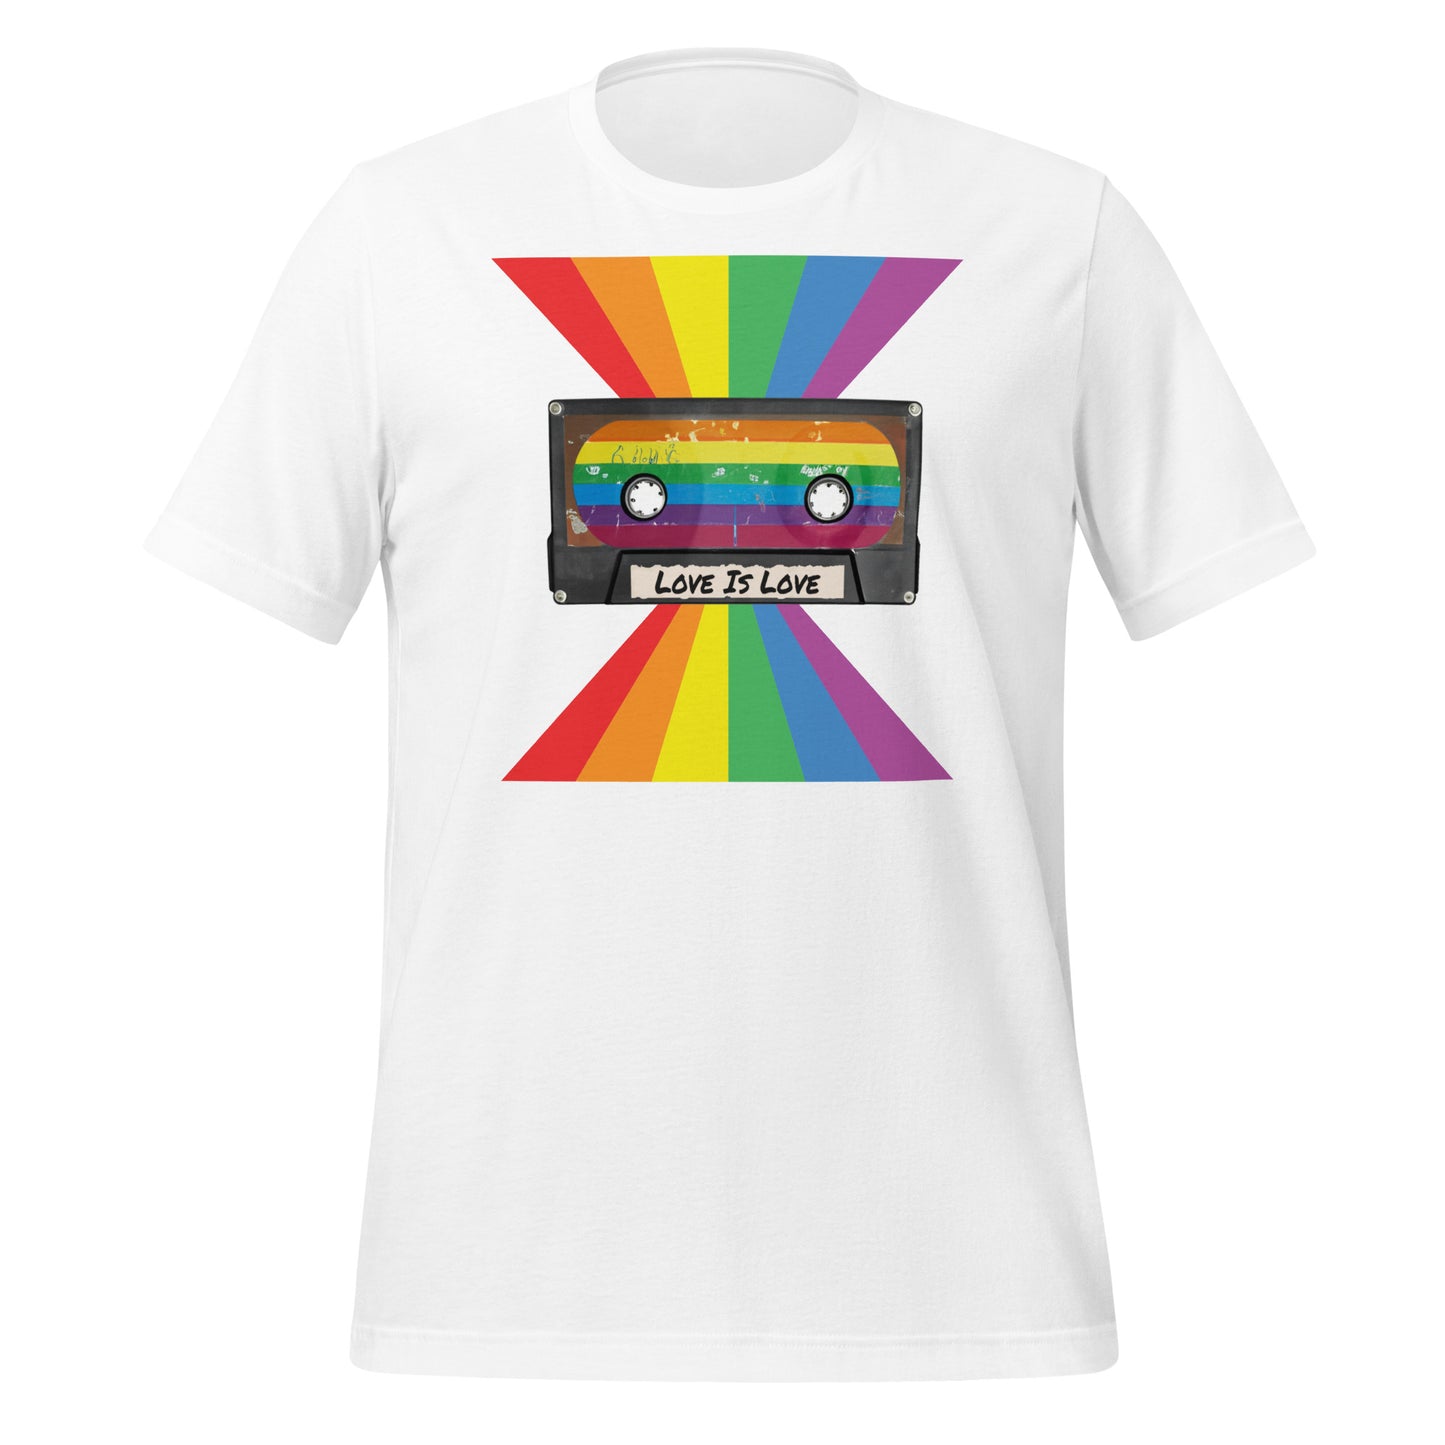 Love is Love Gay Pride t-shirt - Rose Gold Co. Shop